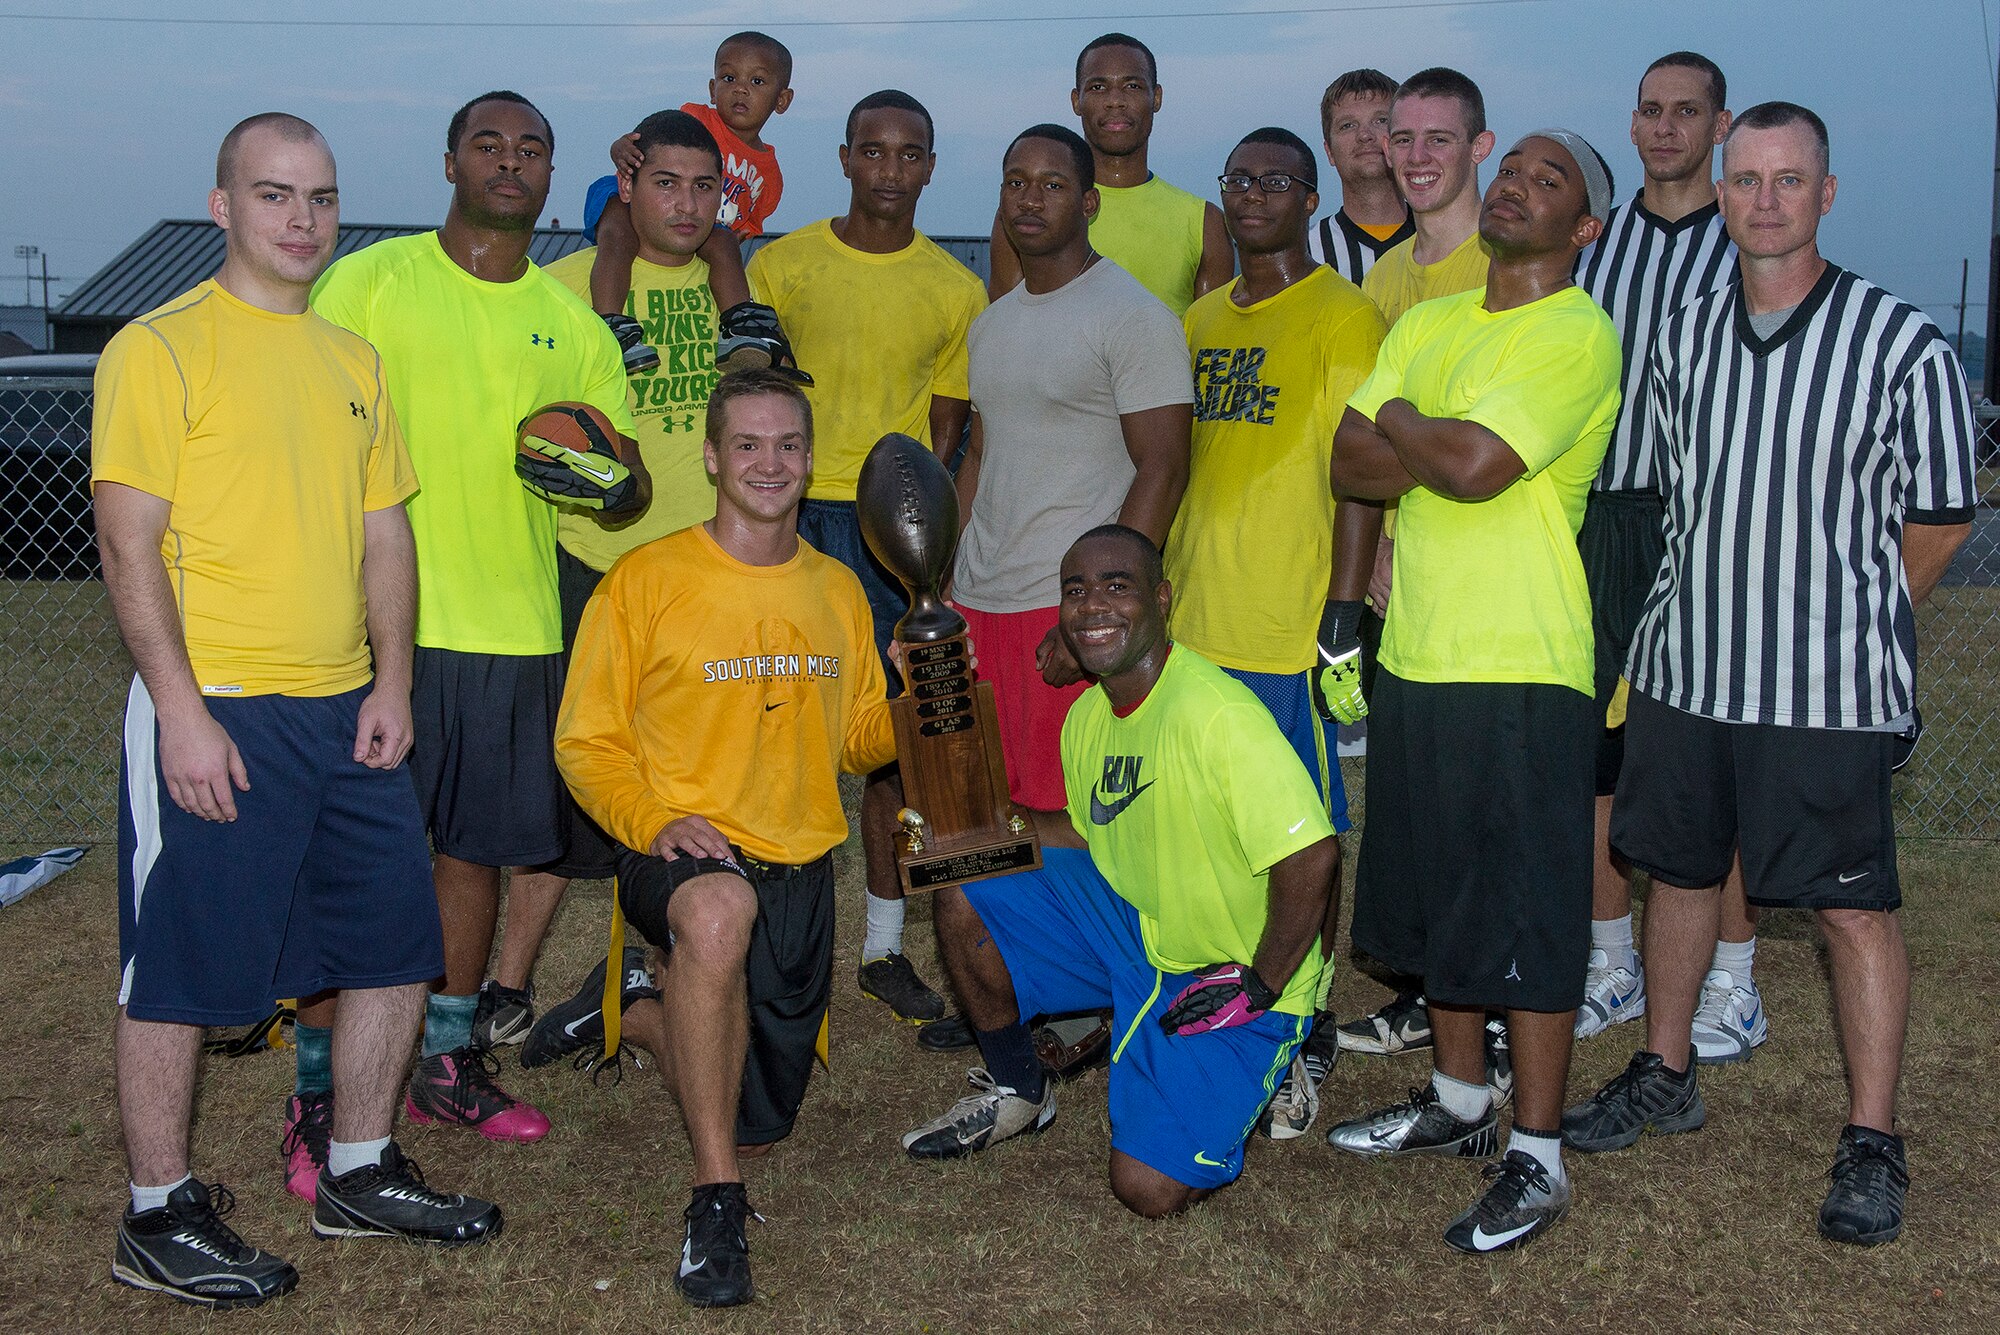 Members of the 314th Aircraft Maintenance Squadron intramural flag football team pose for a group photo after defeating the 19th Aircraft Maintenance Squadron 41-21 Sept. 18, 2013, at Little Rock Air Force Base, Ark. (U.S. Air Force photo by Staff Sgt. Russ Scalf)